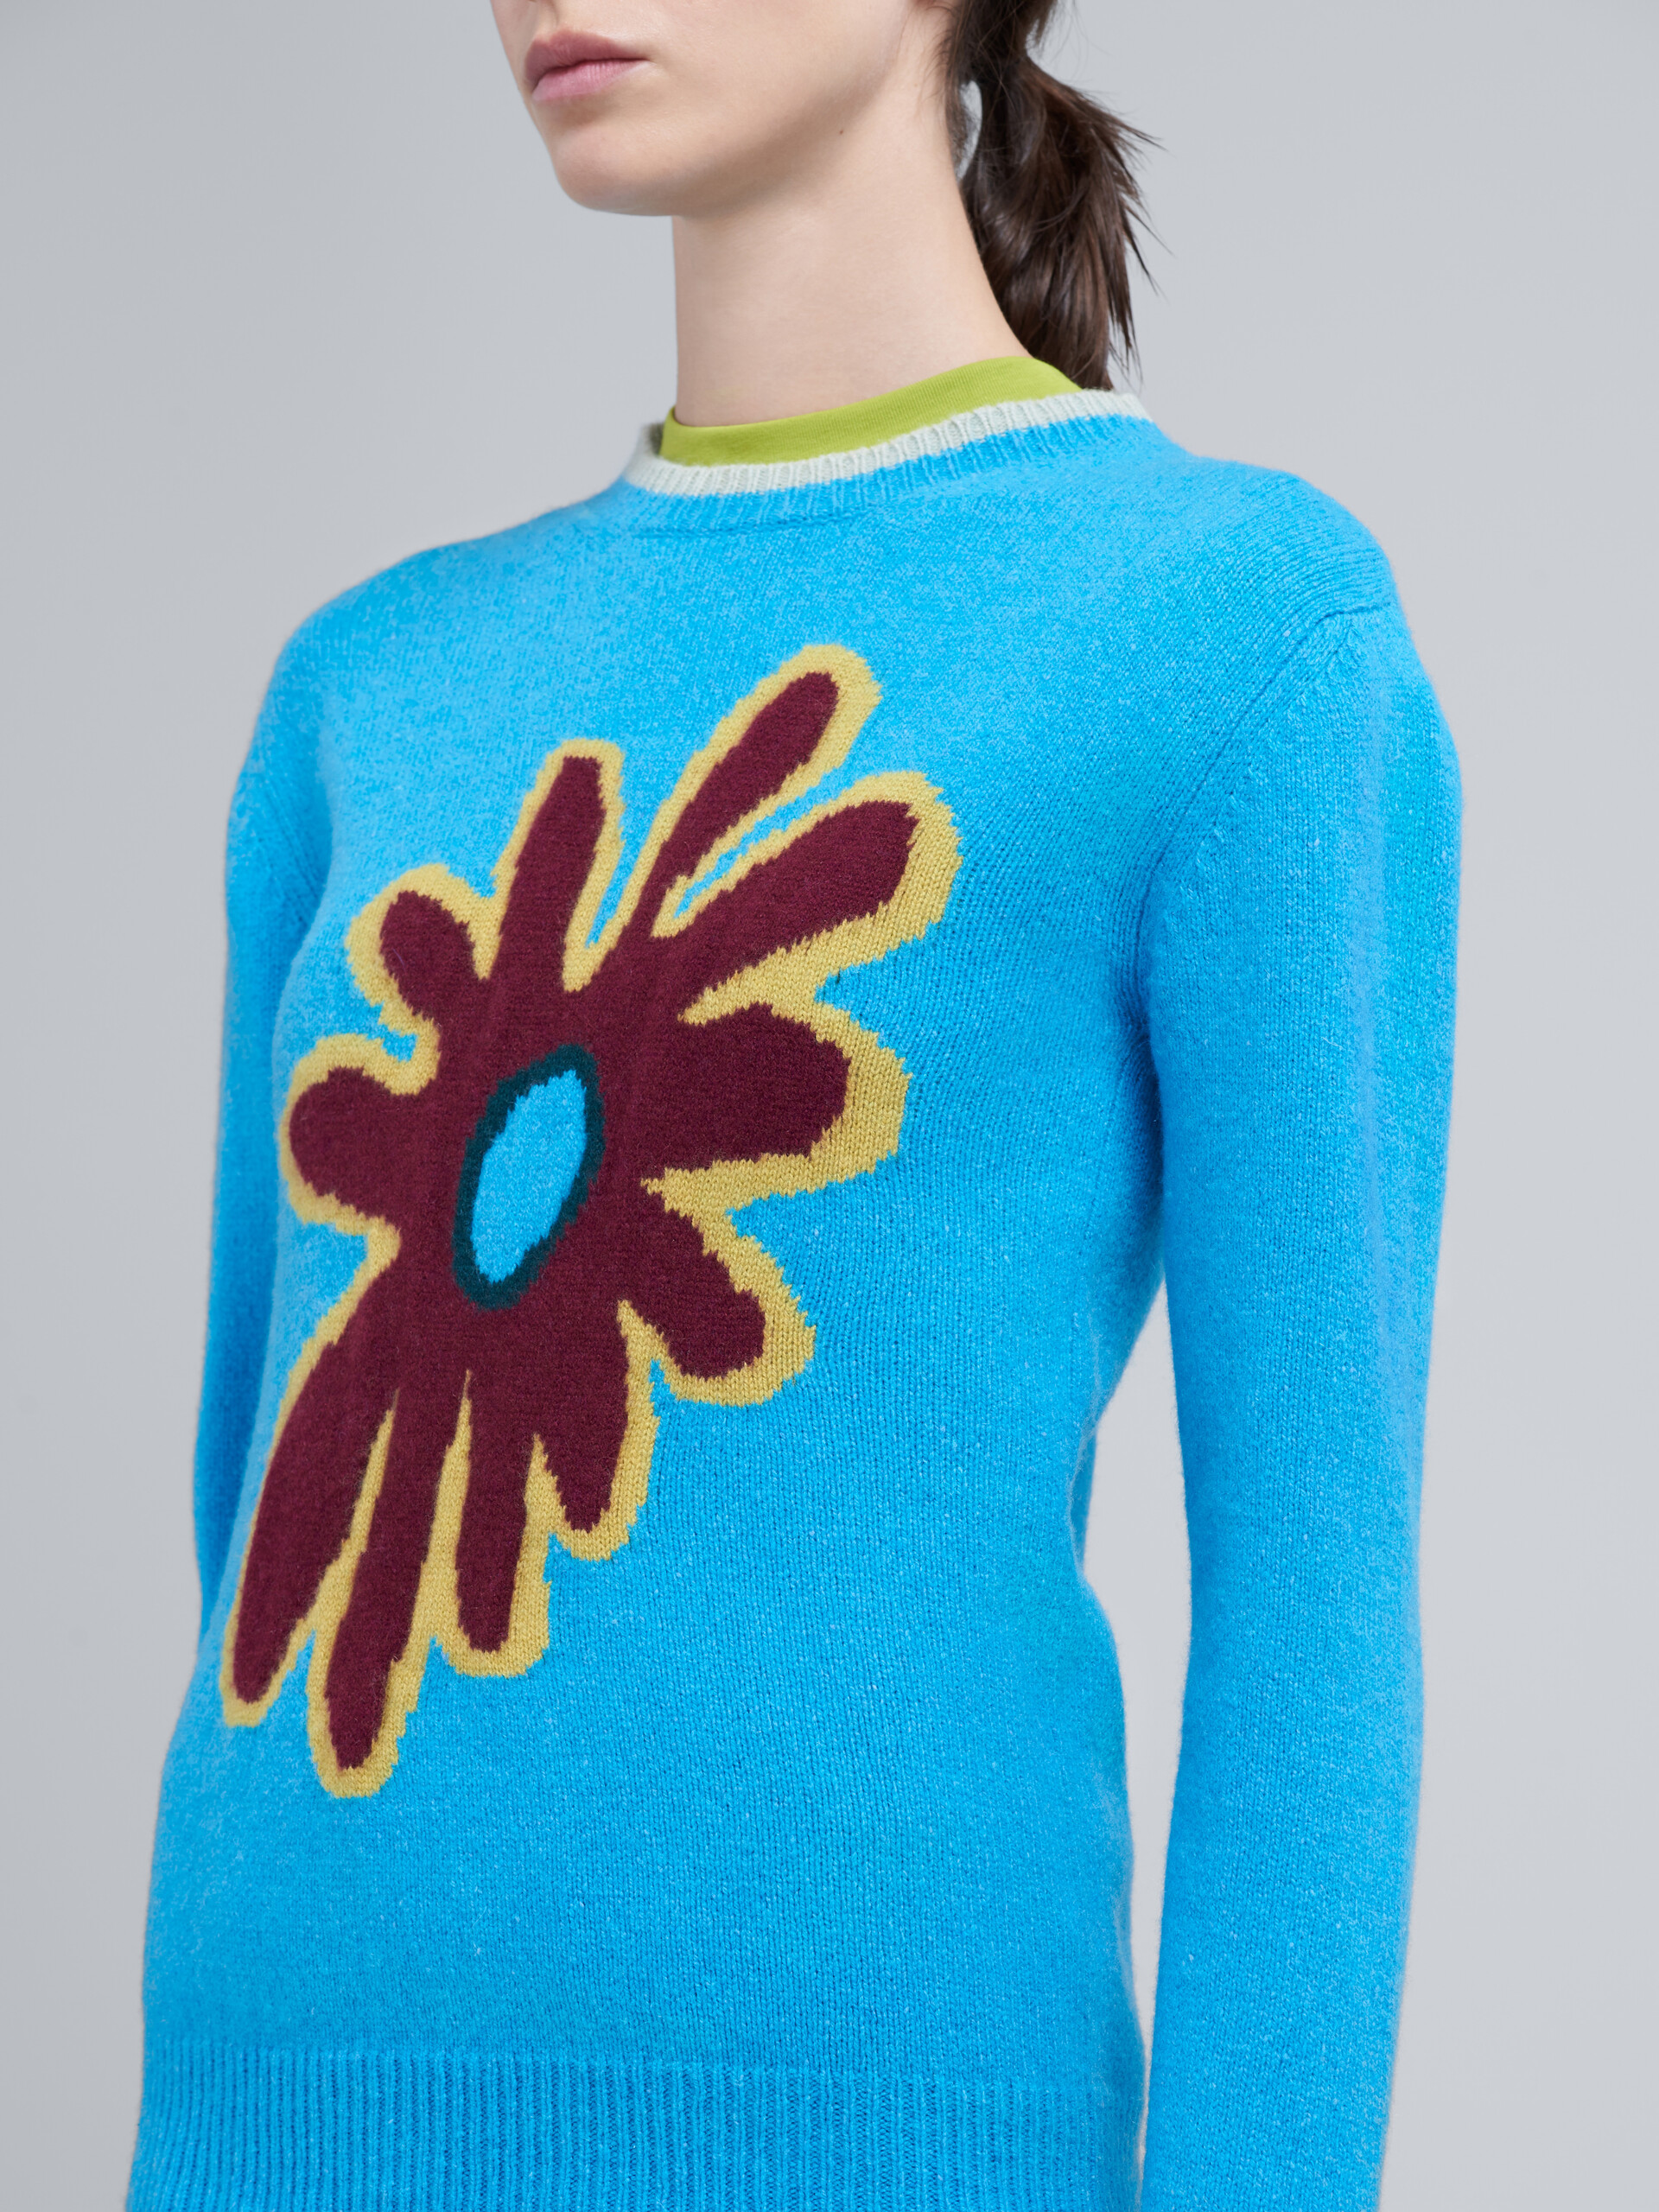 70’s flower cashmere sweater - Pullovers - Image 4